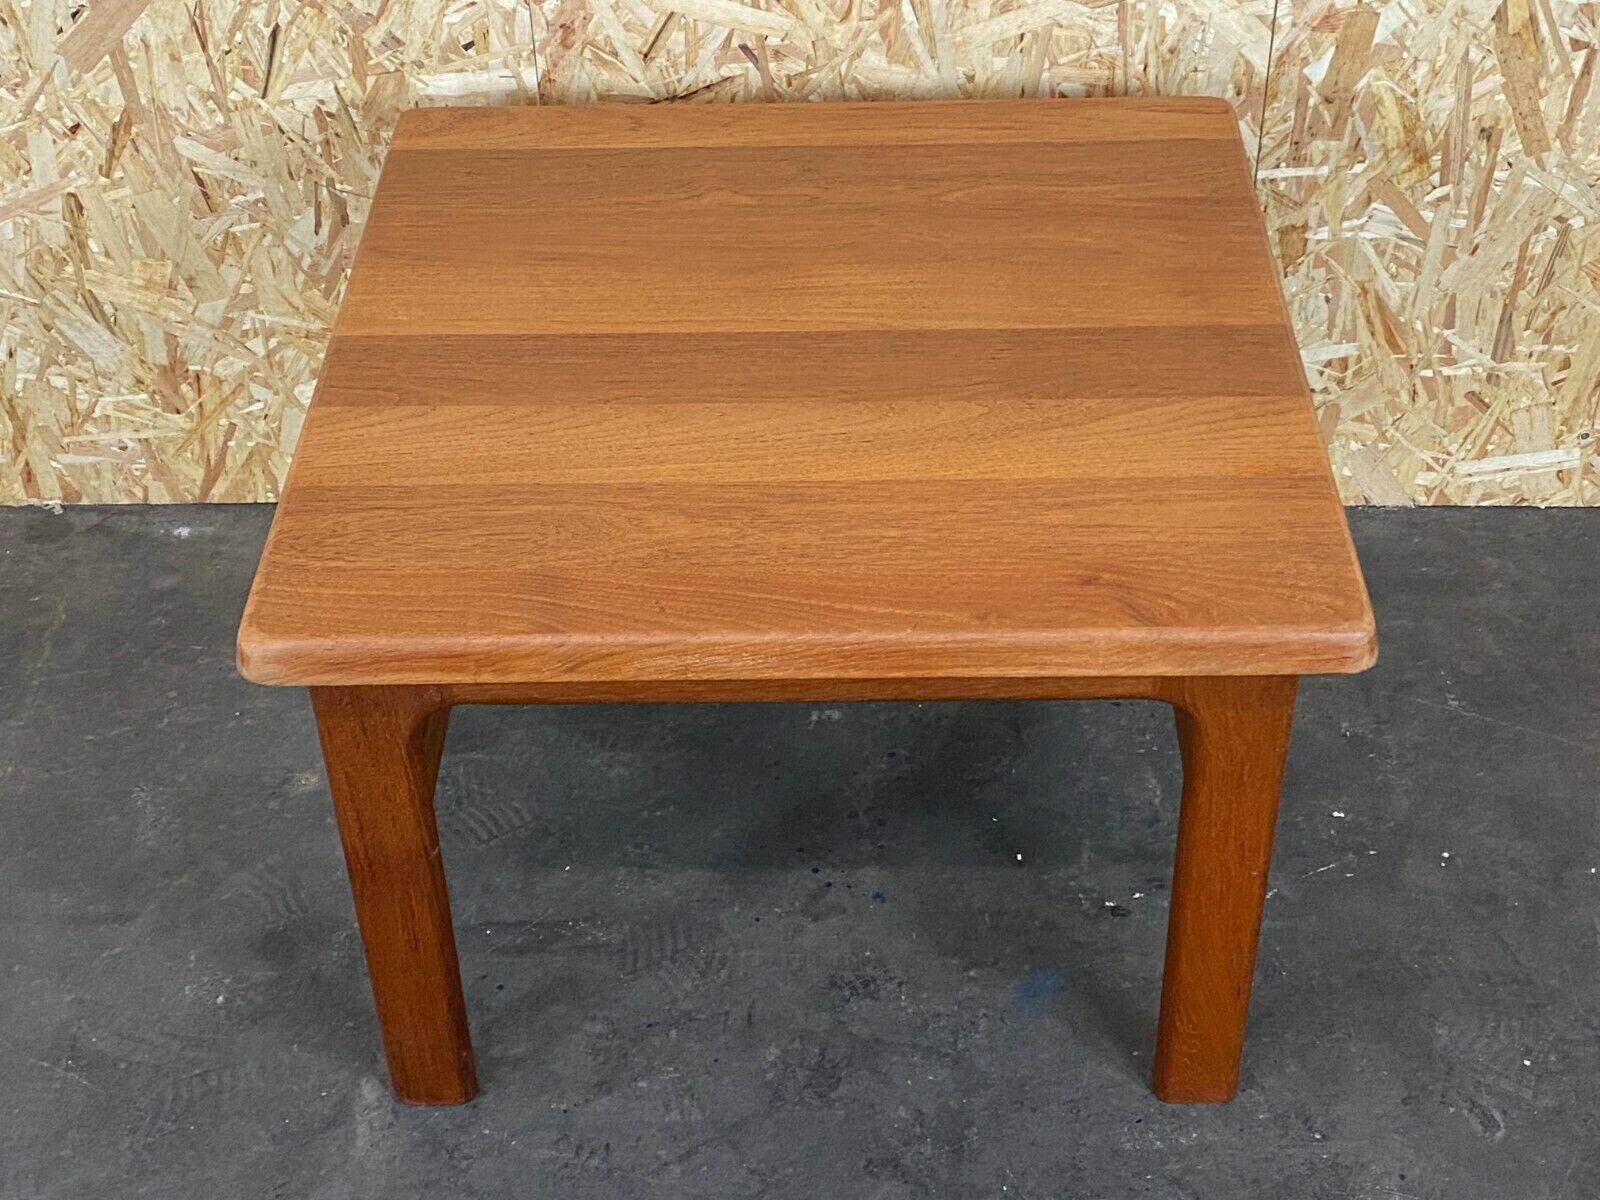 60s 70s Teak Table Side Table Coffee Table Niels Bach Design Denmark For Sale 2